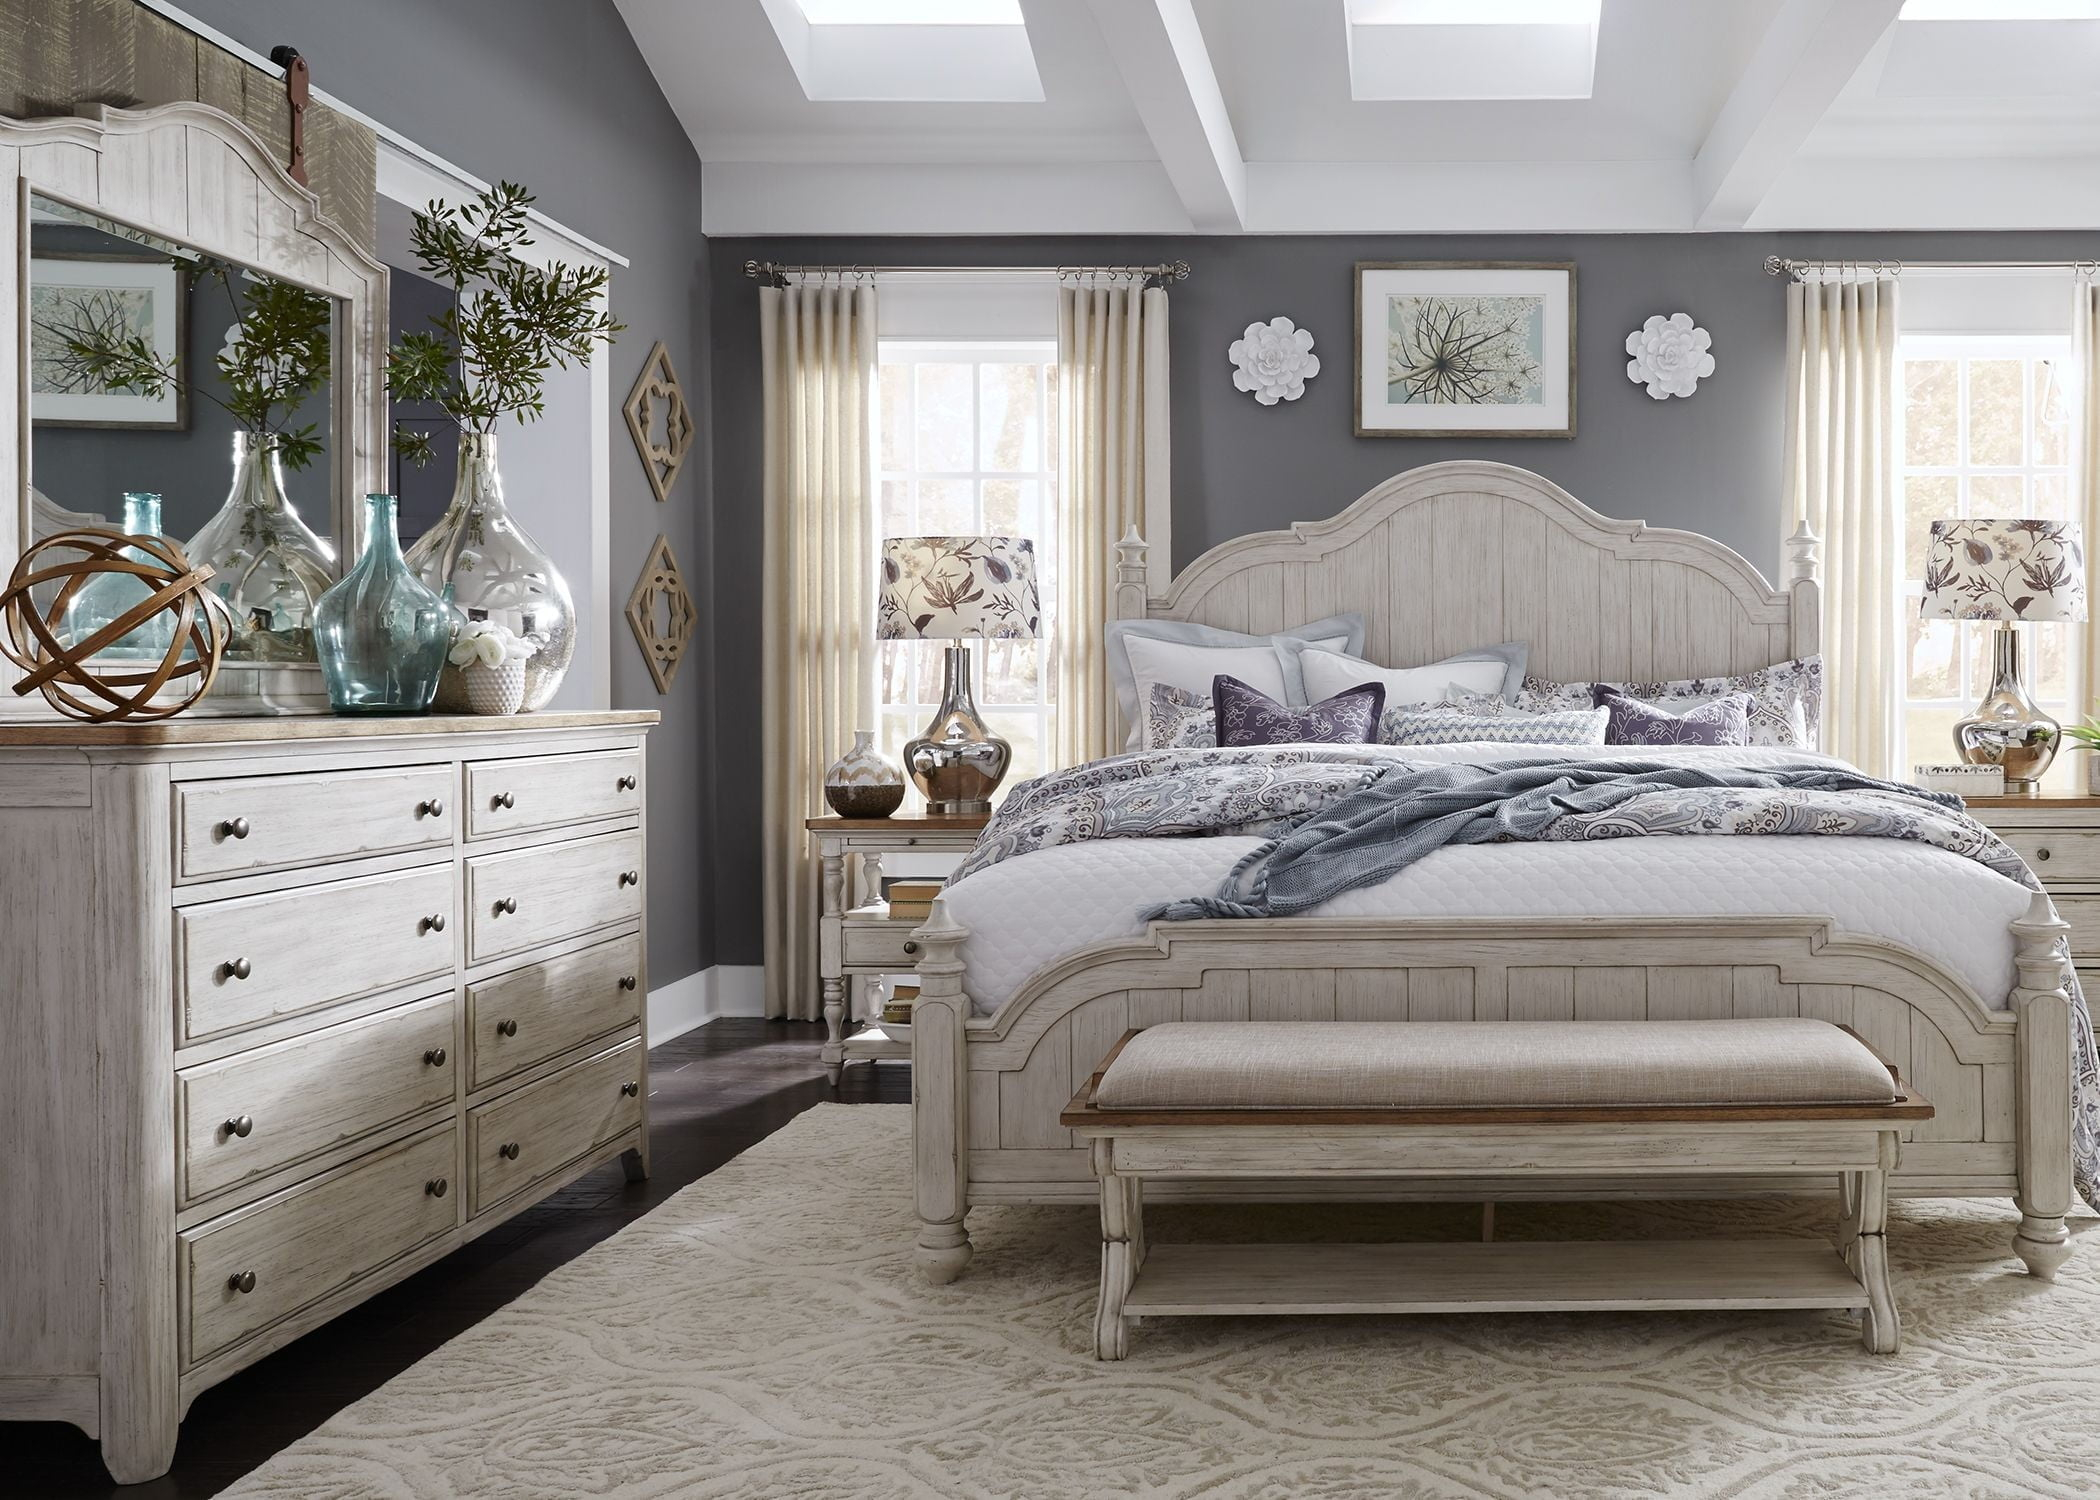 Farmhouse Bedroom Furniture Unique Themes Design Home Modern Ideas in sizing 2100 X 1500